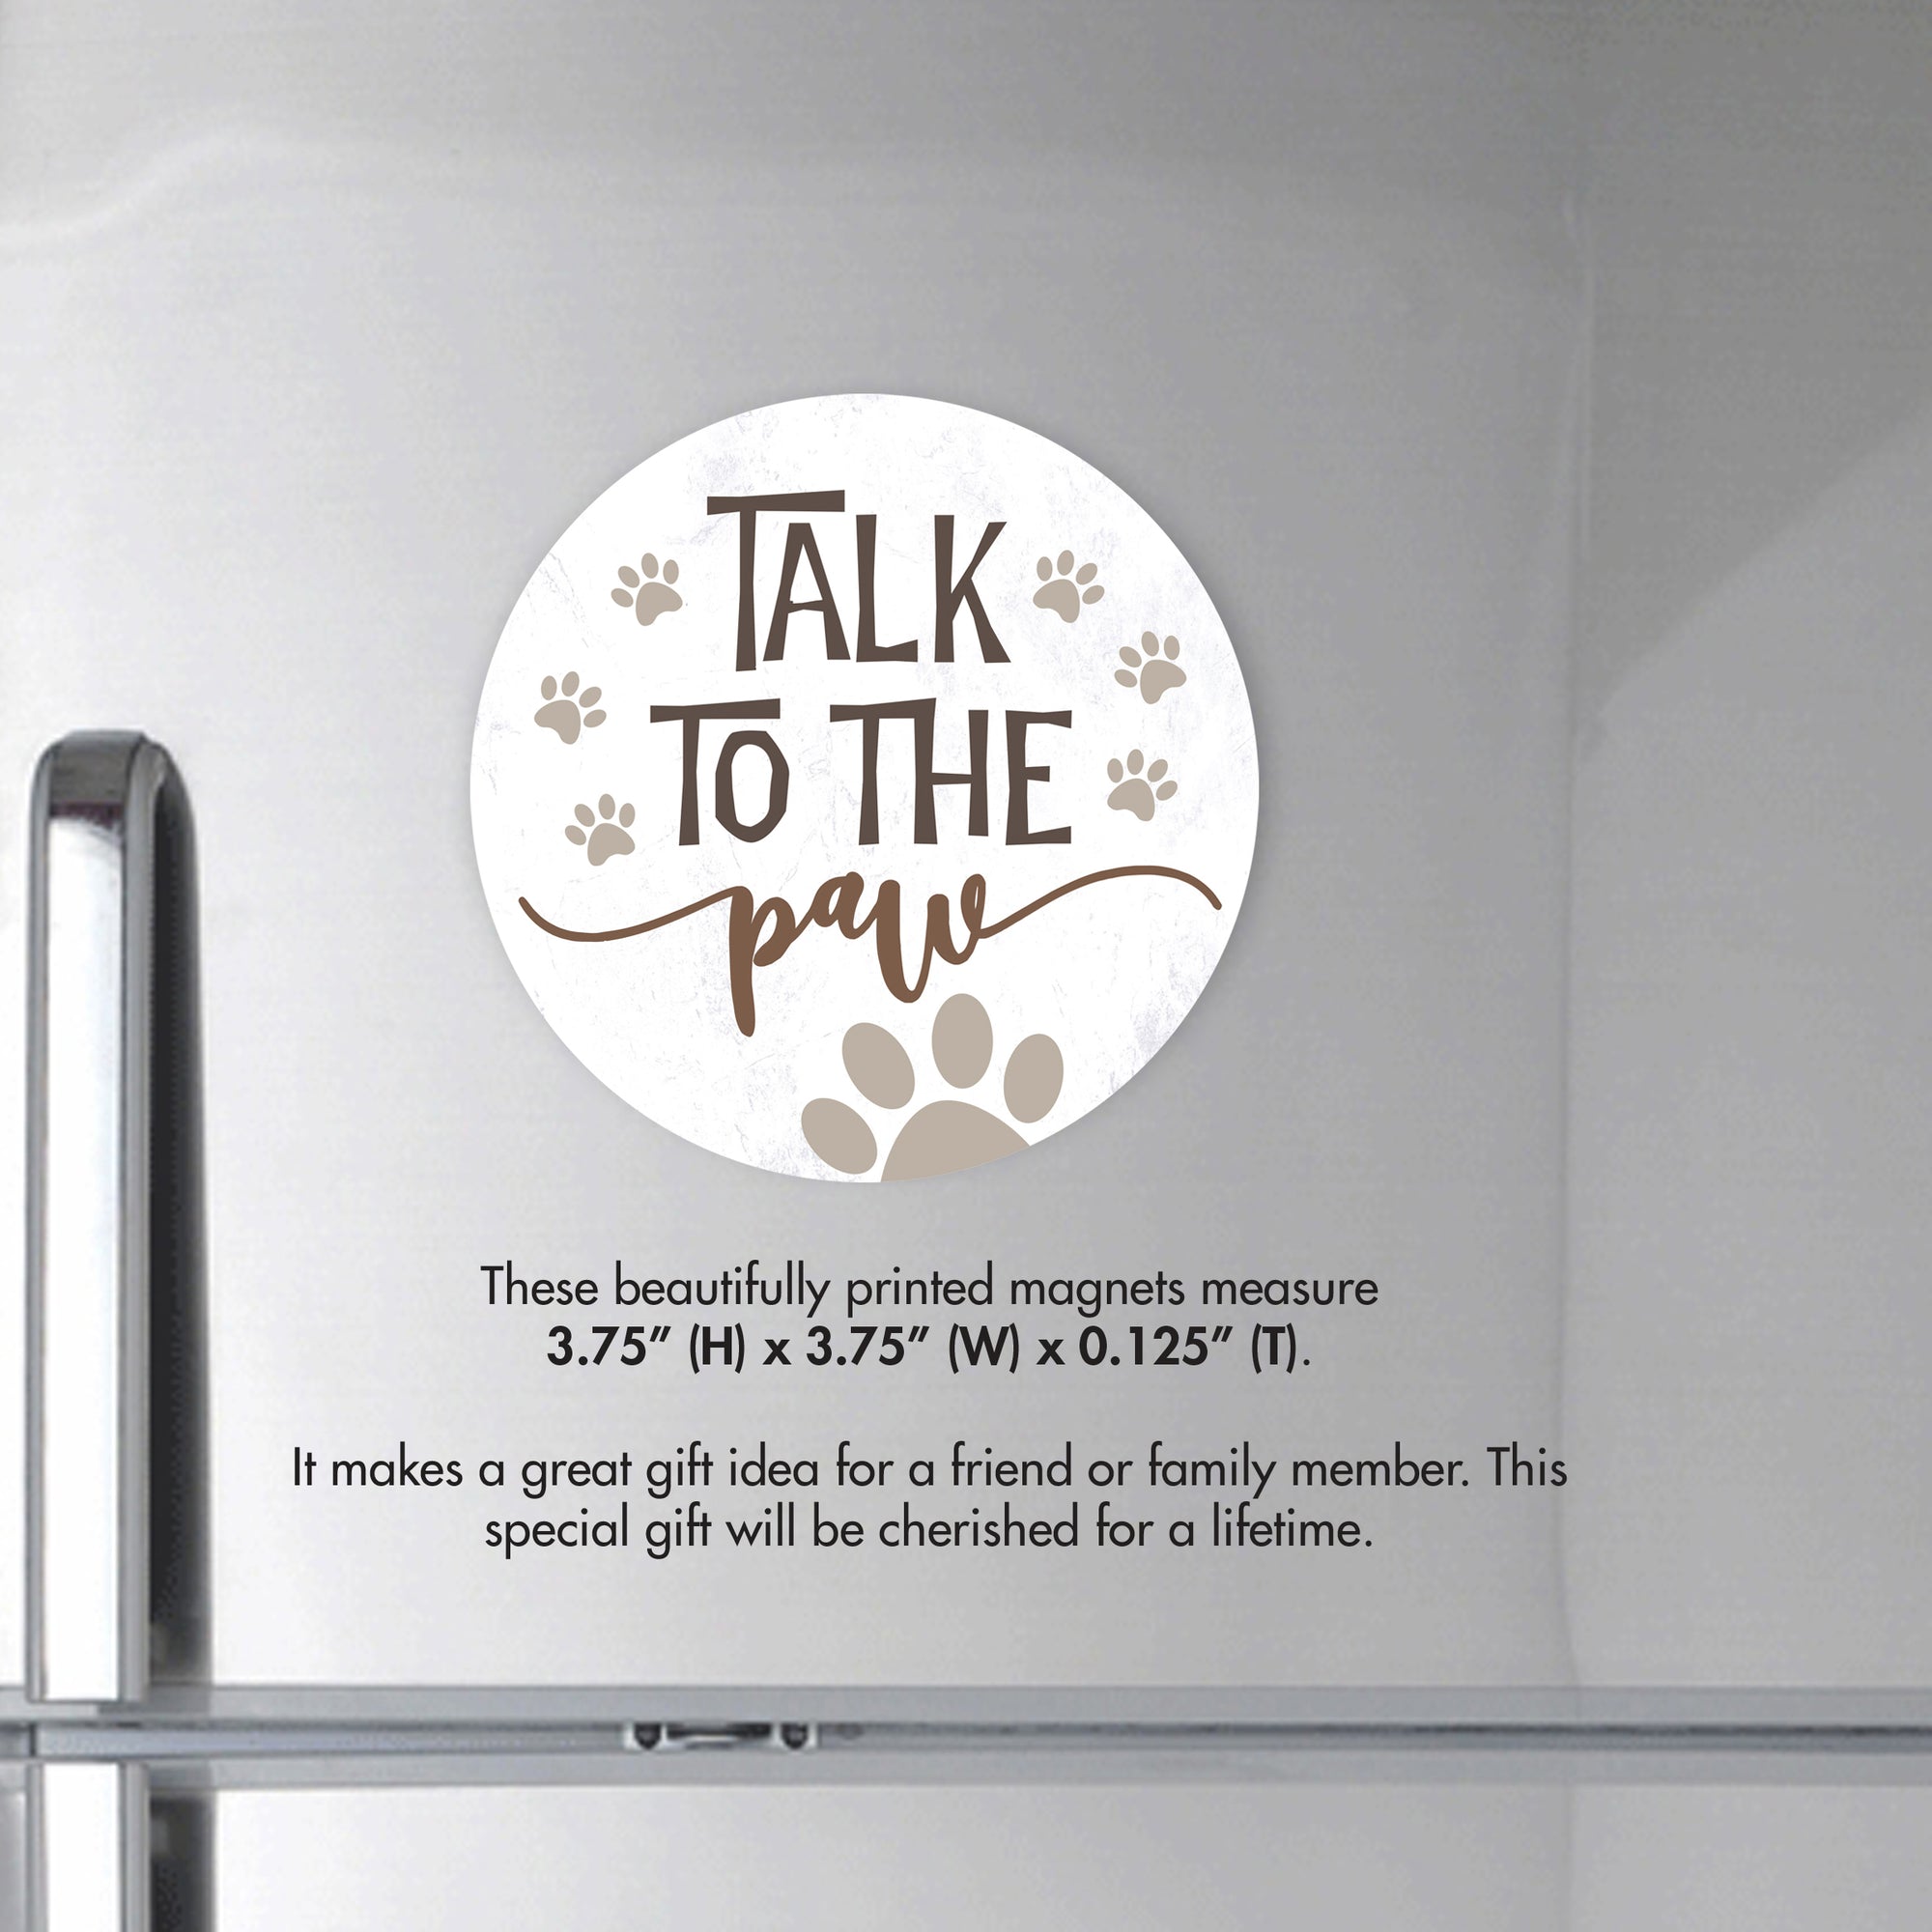 Refrigerator Magnet Perfect Gift Idea For Pet Owners - To The Talk Paw